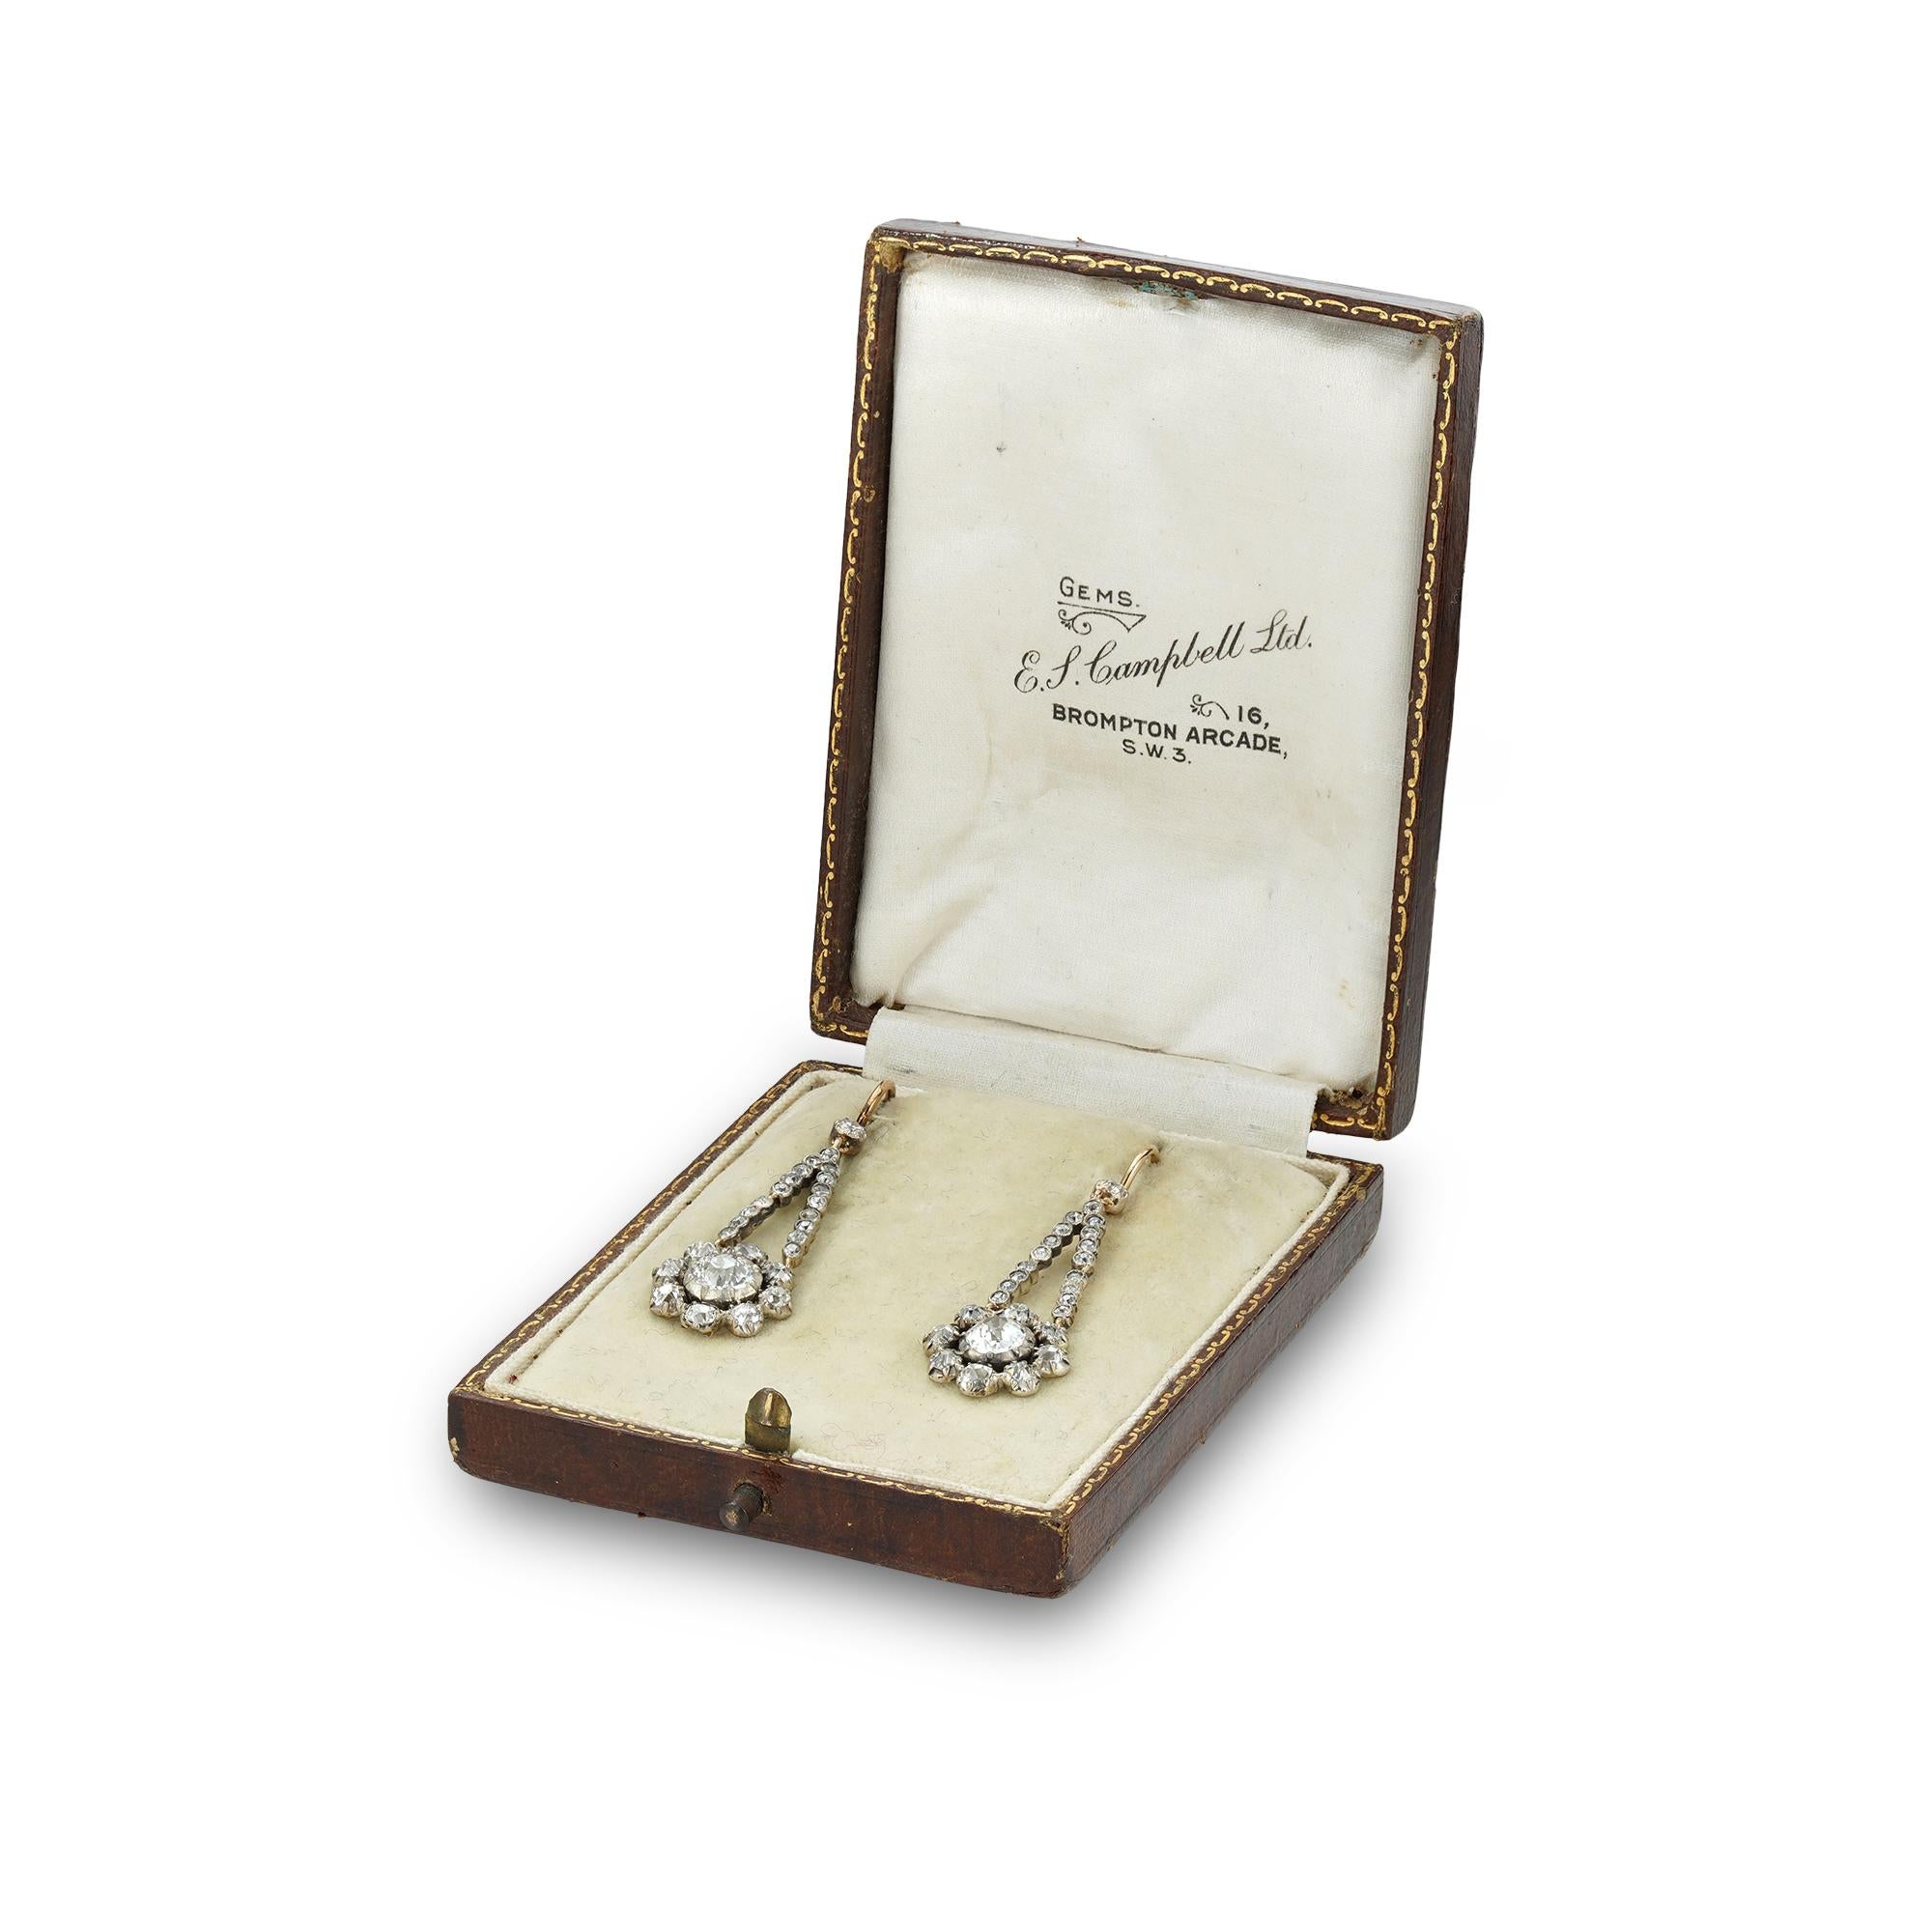 A pair of Georgian diamond pendant earrings, each with a central old-cut diamond weighing approximately 0.7 carats, surrounded by an old-cut diamond cluster, each cluster suspended from a flexible run of smaller old-cut diamonds, all to a